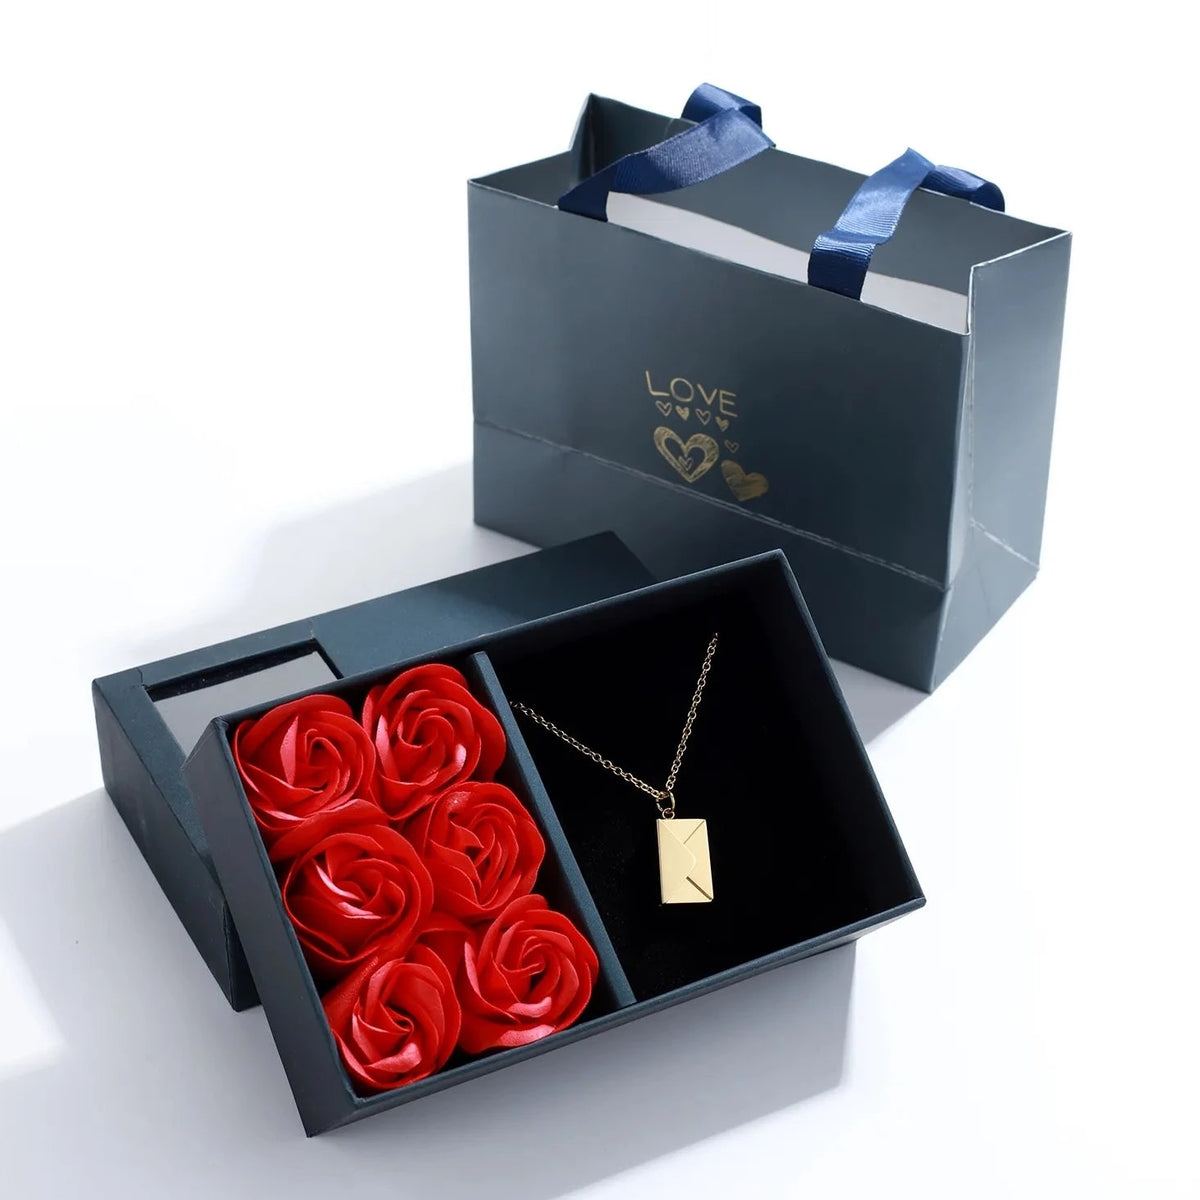 Love Letter Envelope with Rose Gift Box